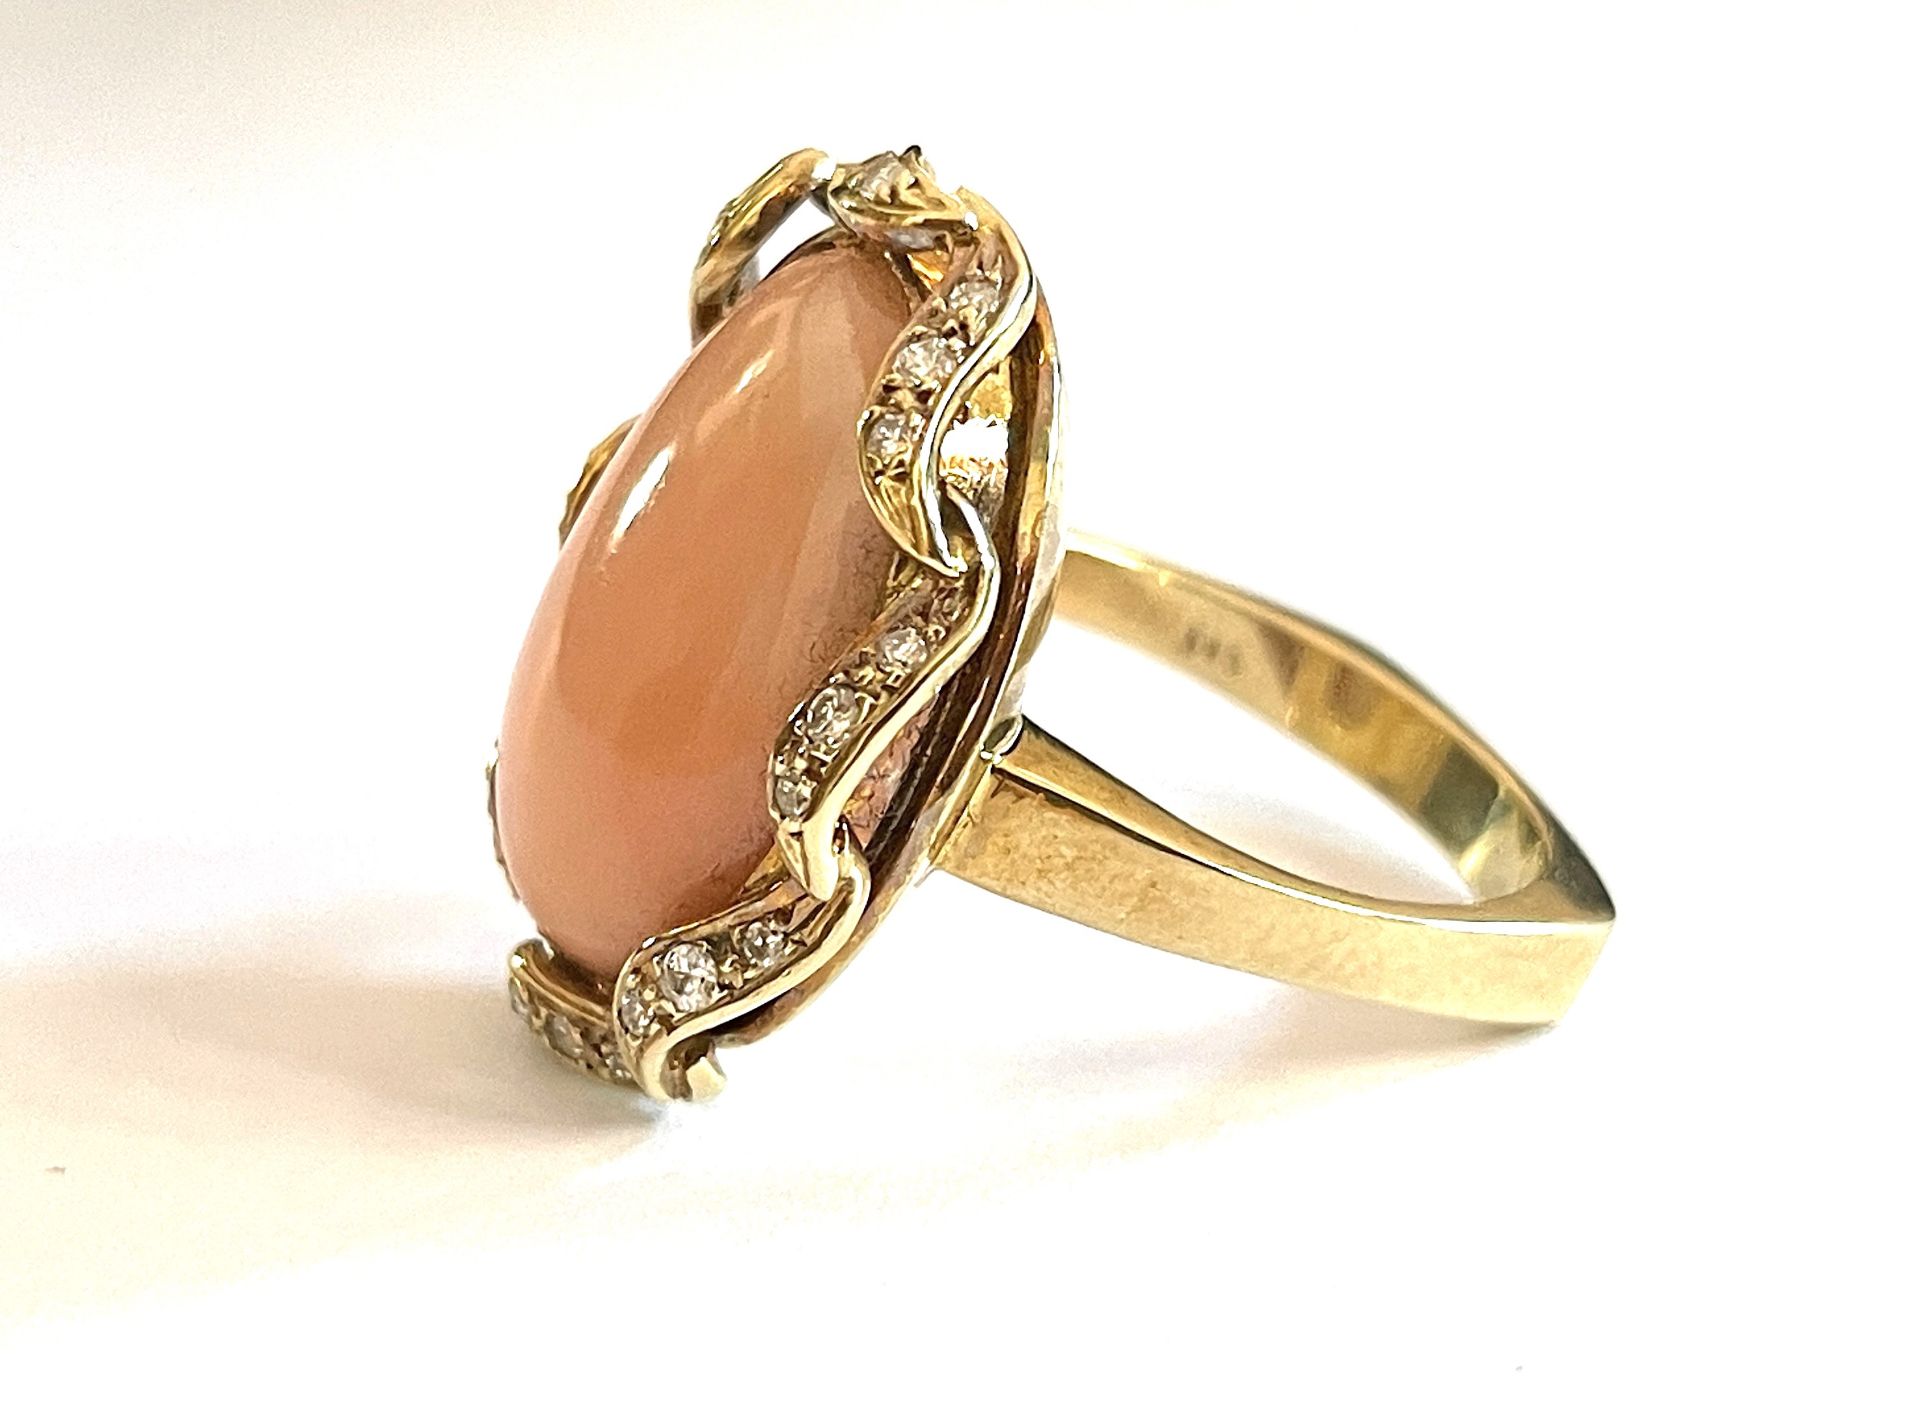 Coral ring with diamonds - Image 5 of 11